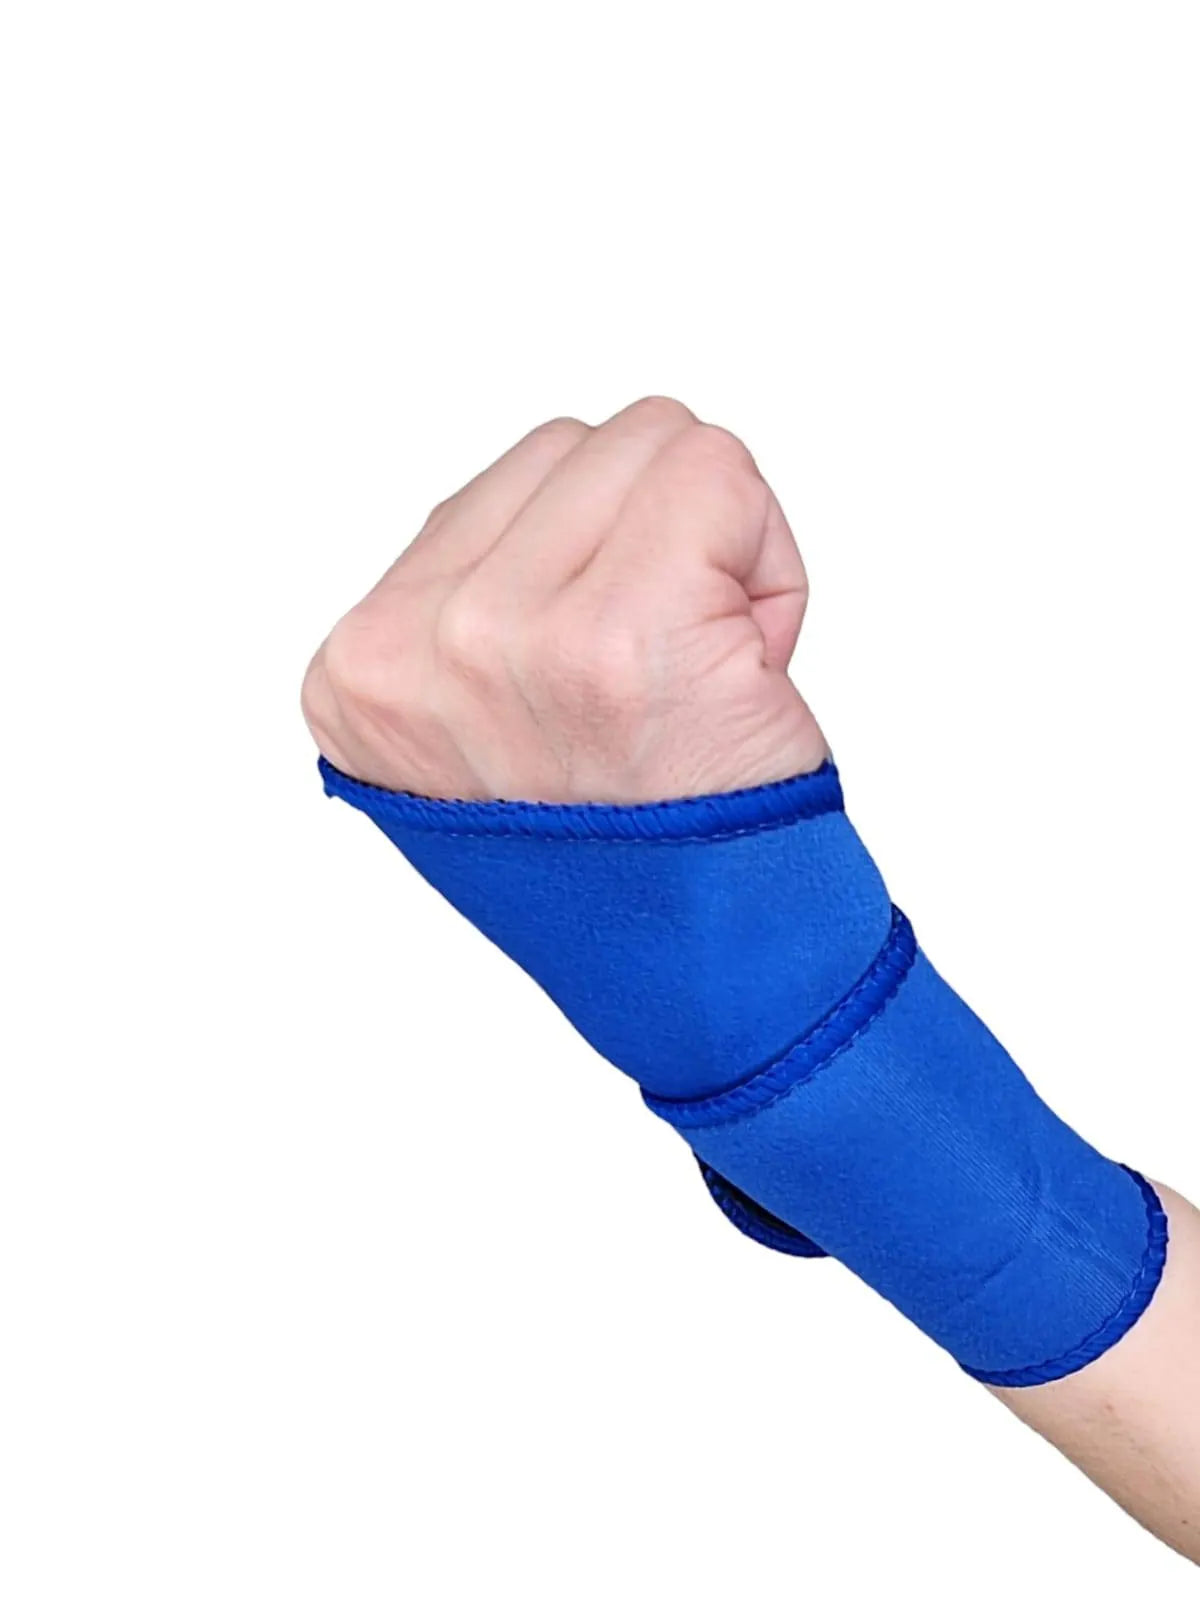 Image of a Weilong Wrist Support worn on a person's wrist, showcasing its design and comfortable fit.